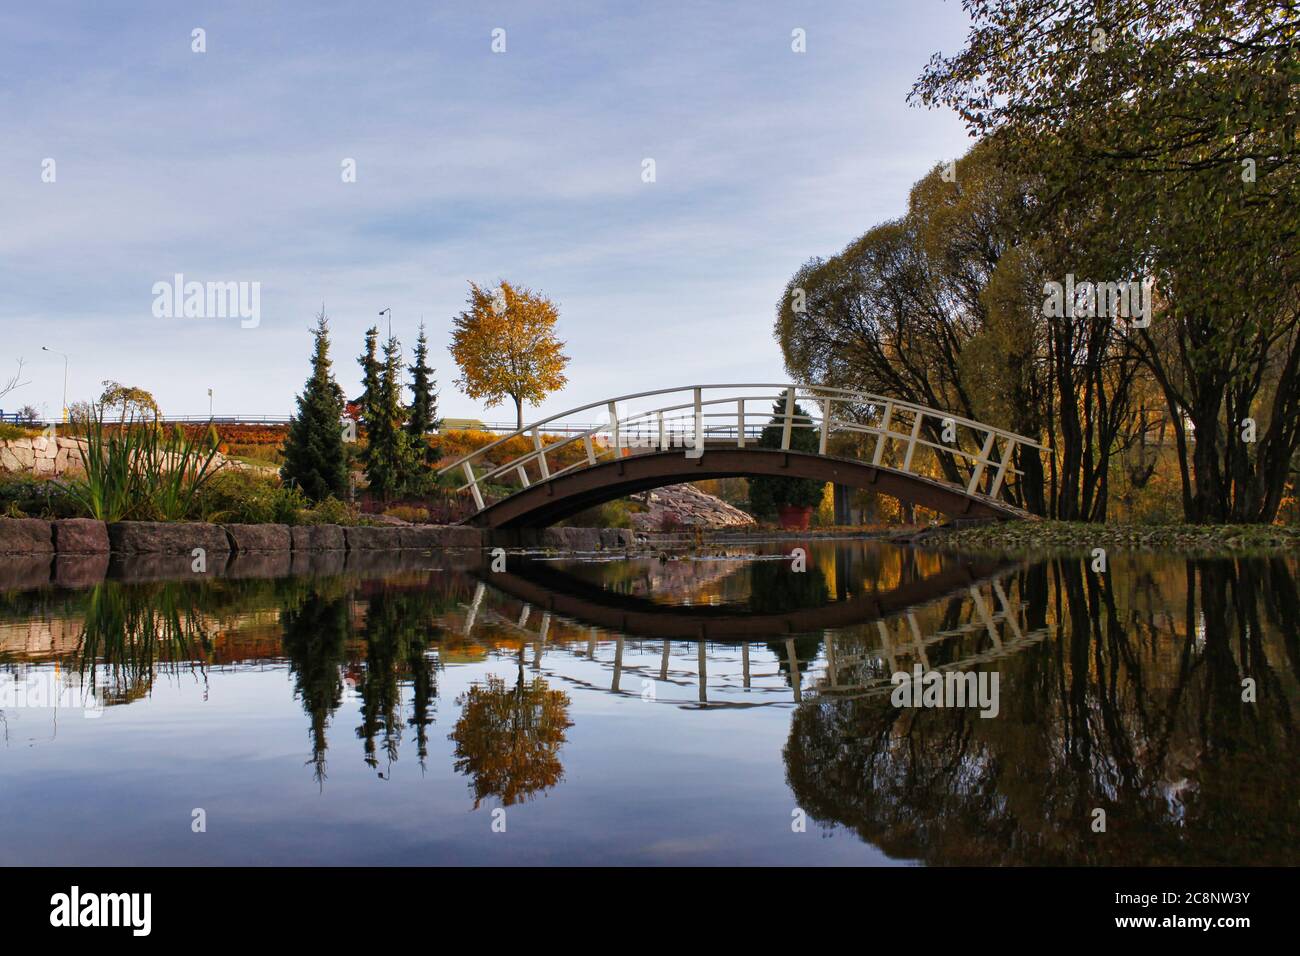 Landscape of arced bridge over pond with reflections on water. Location Kotka, Finland Stock Photo